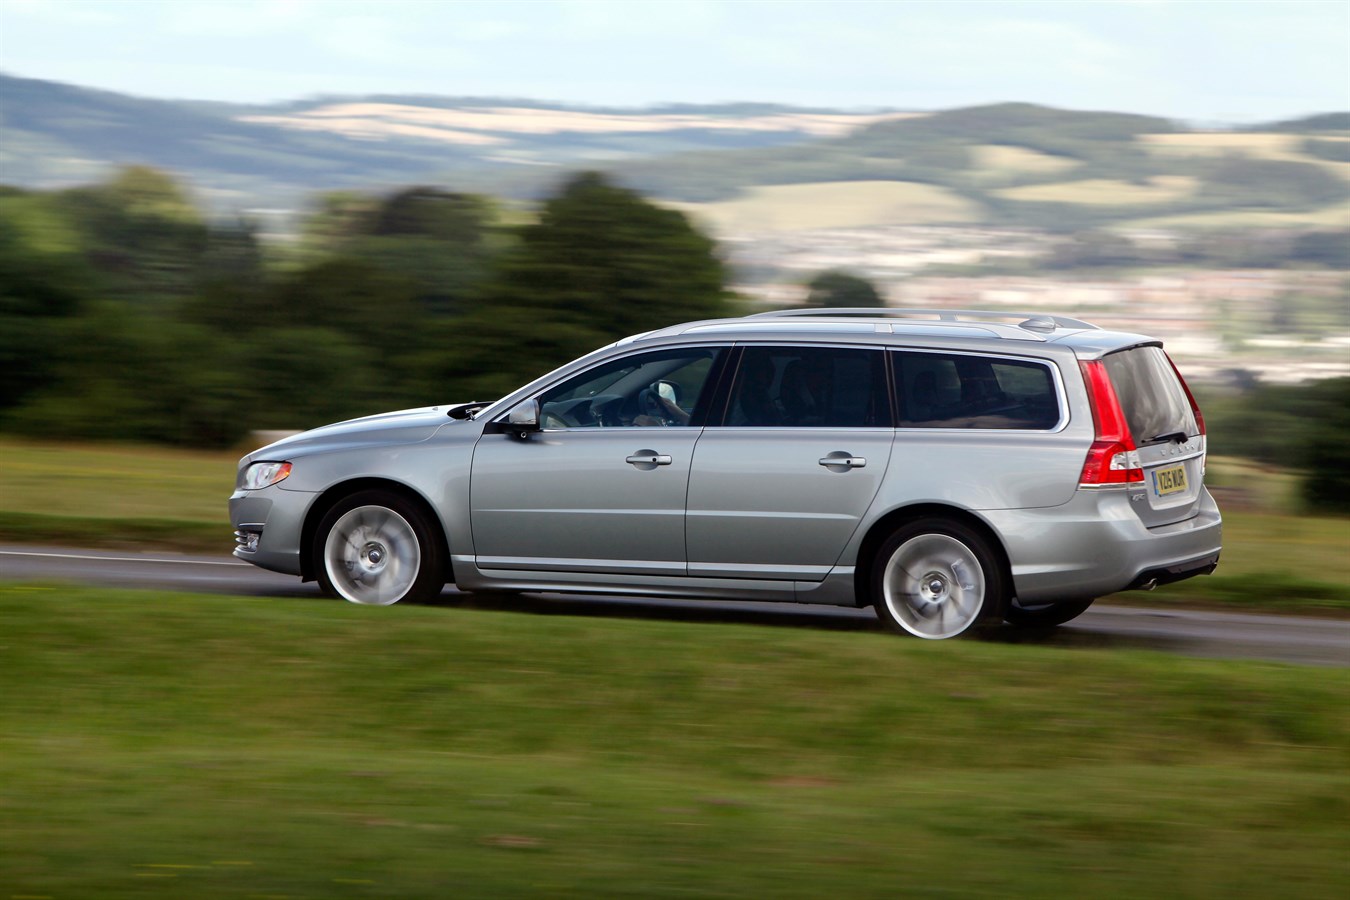 VOLVO CARS EXTENDS ITS DRIVE-E POWERTRAIN ROLL-OUT PROGRAMME